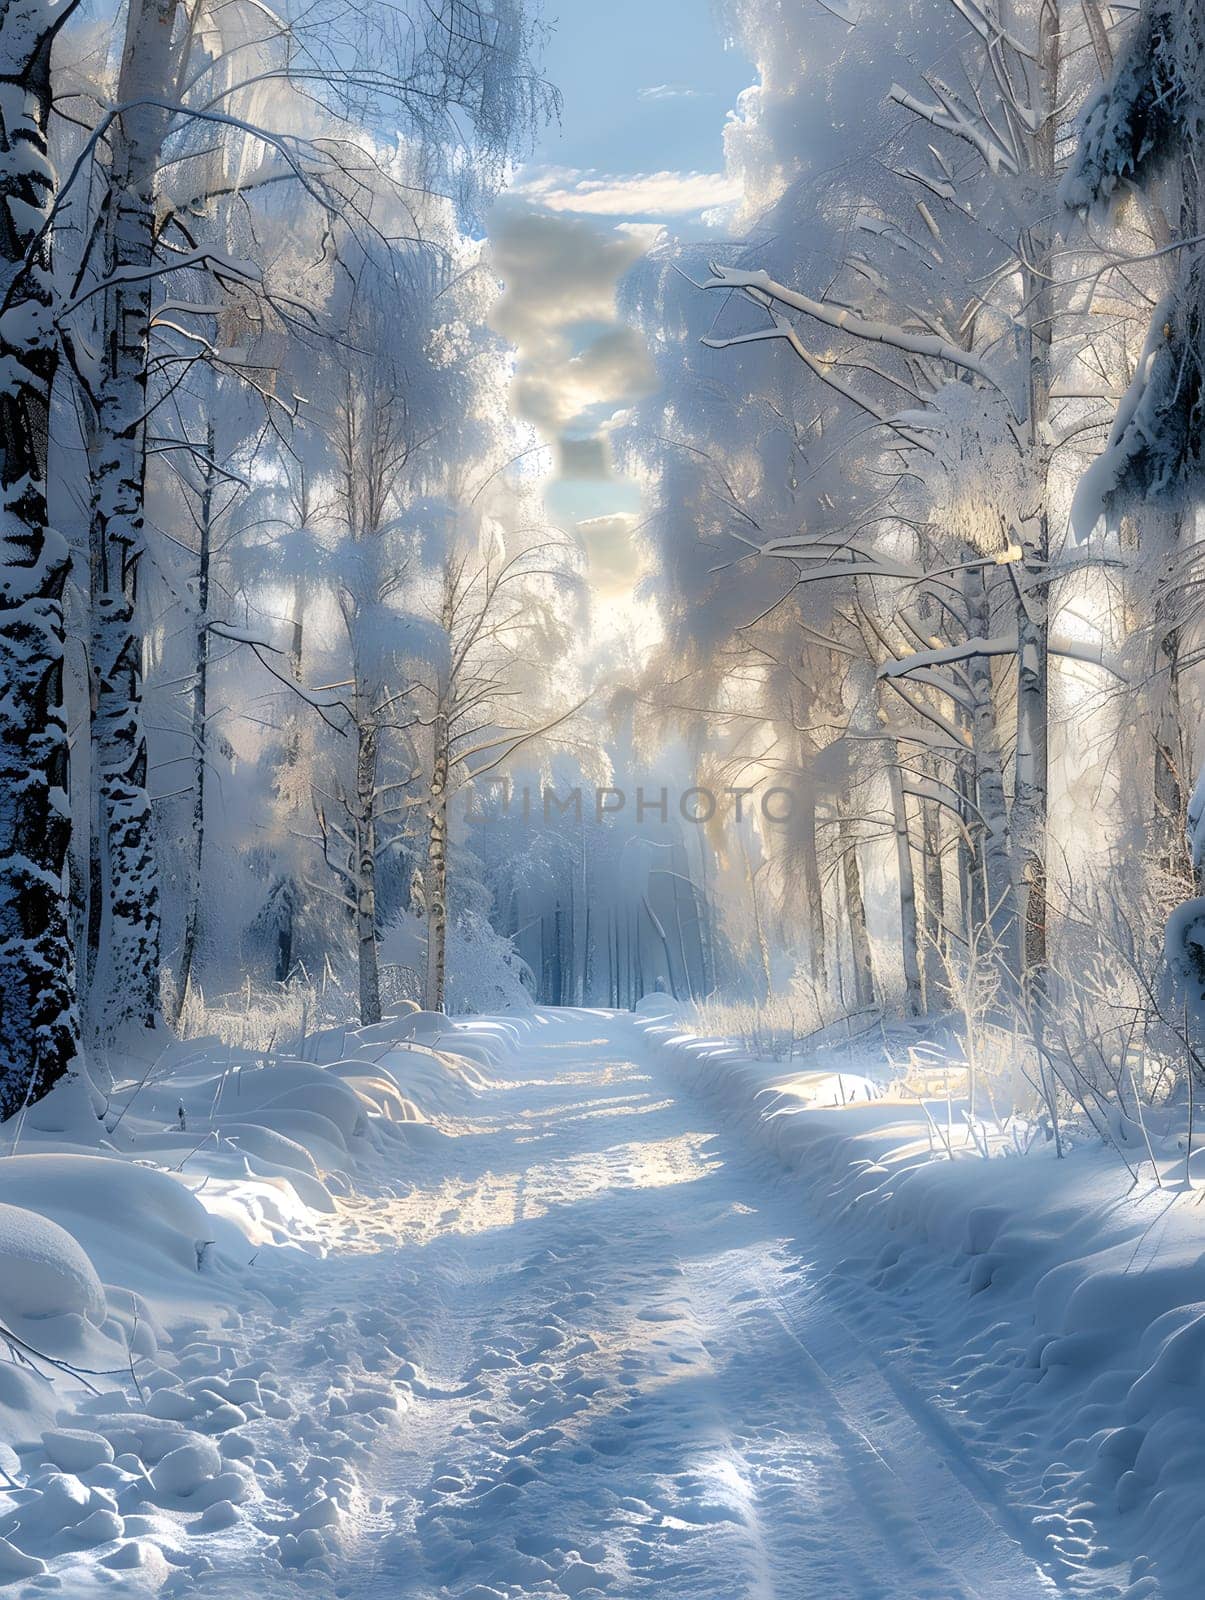 The snowy forest is a mesmerizing natural landscape with trees and twigs covered in snow. The road cuts through the wood under the freezing sky